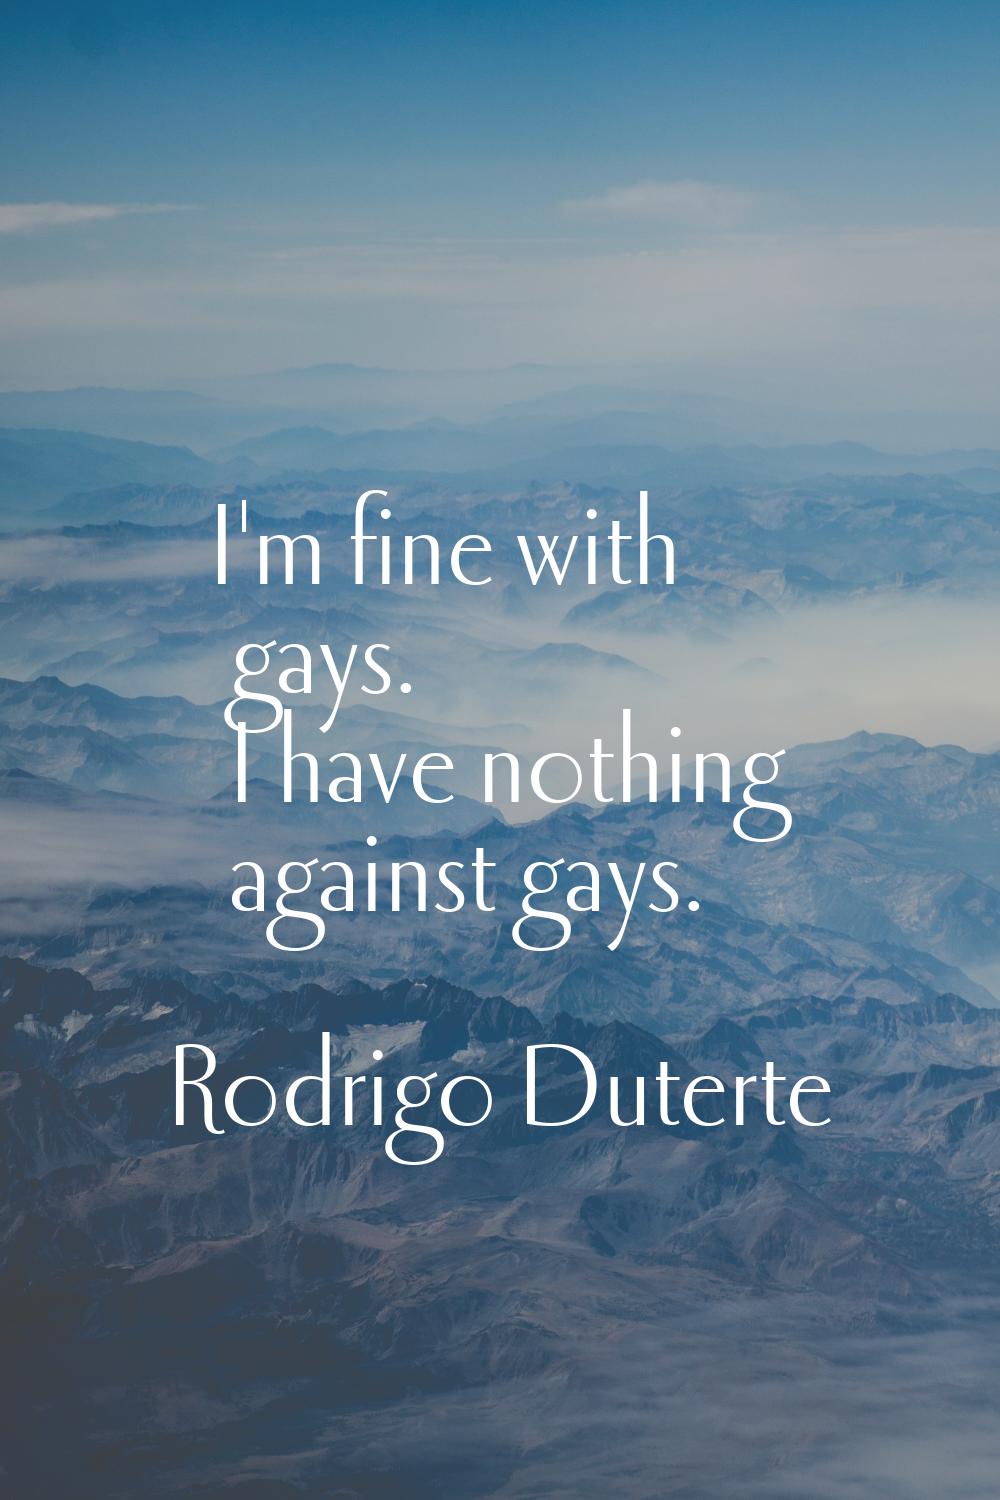 I'm fine with gays. I have nothing against gays.